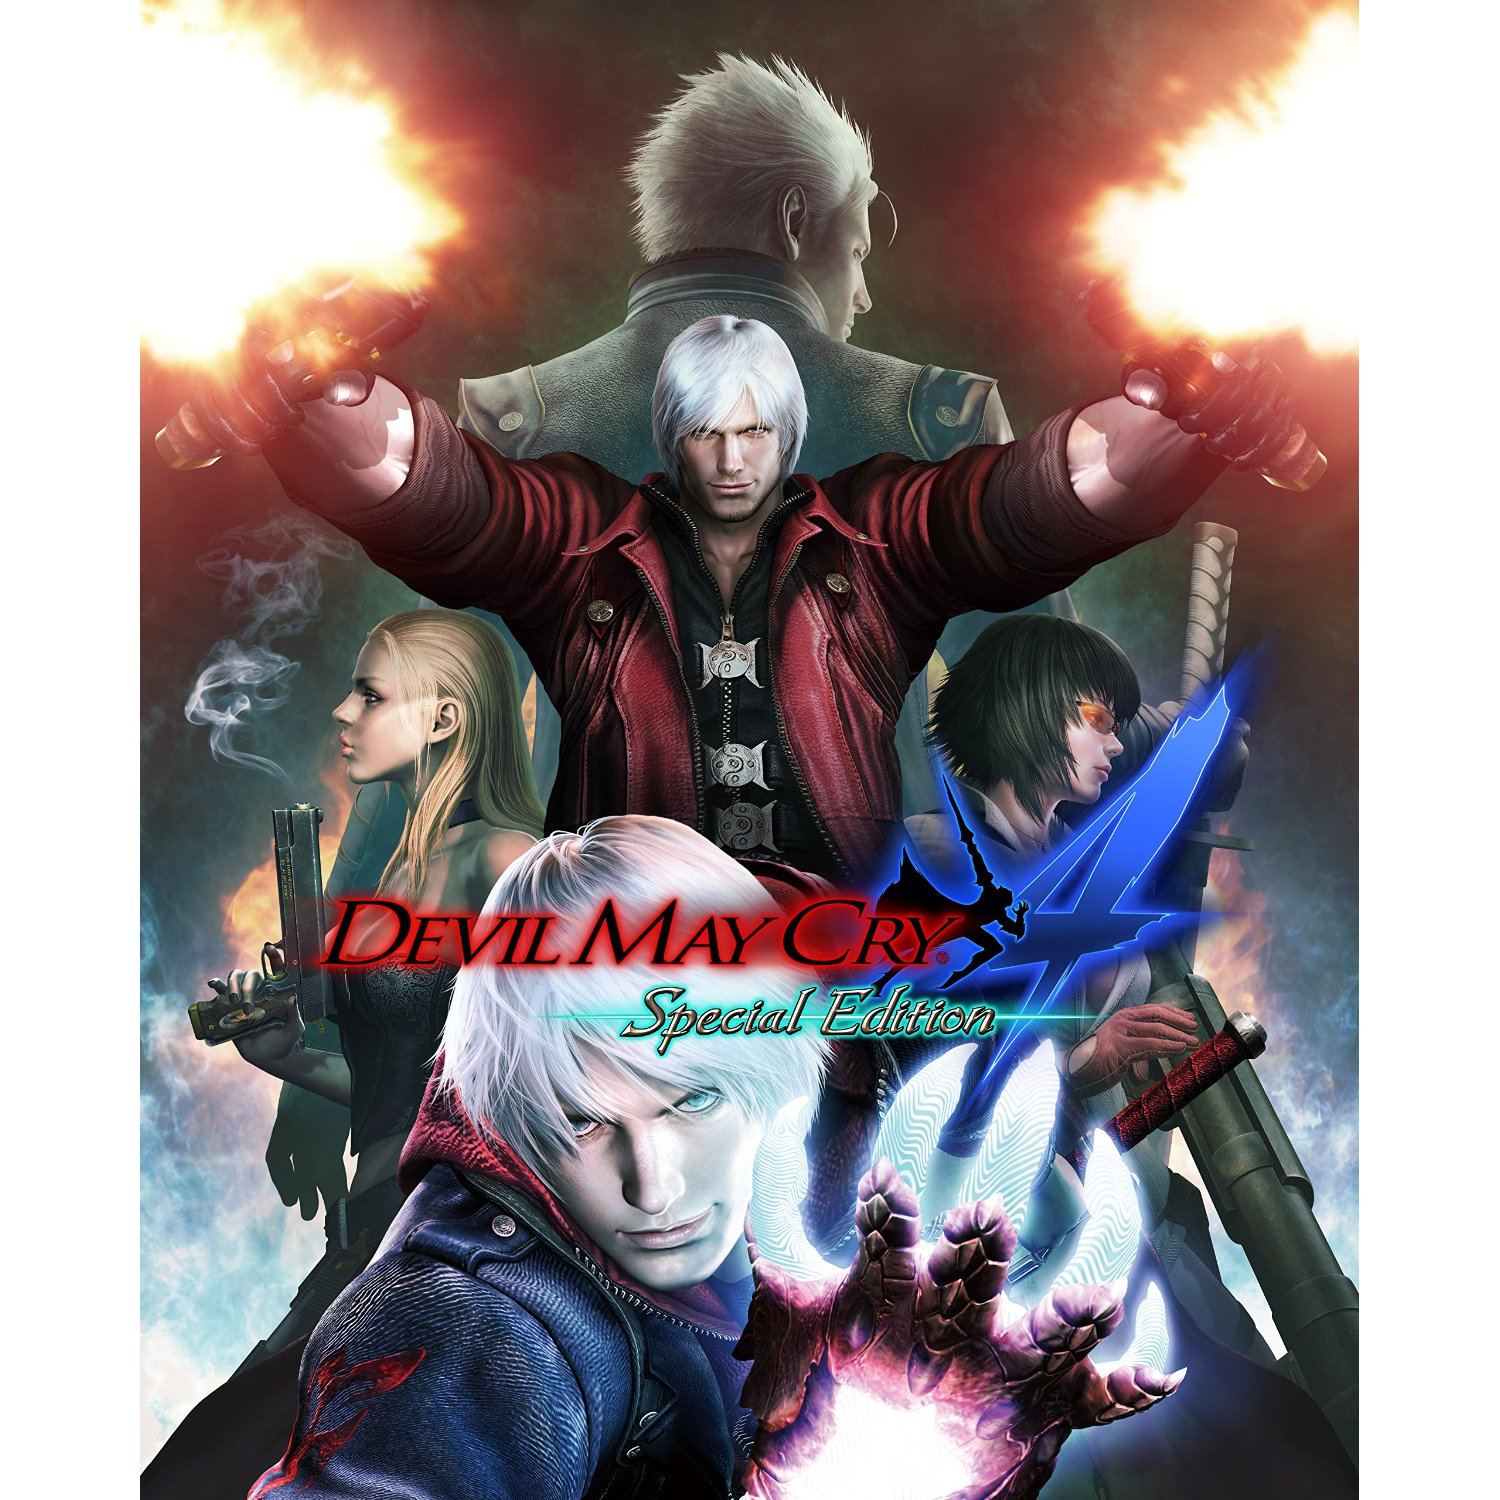 devil-may-cry-4-special-edition-english-japanese-407989.1.jpg?nmsjz4